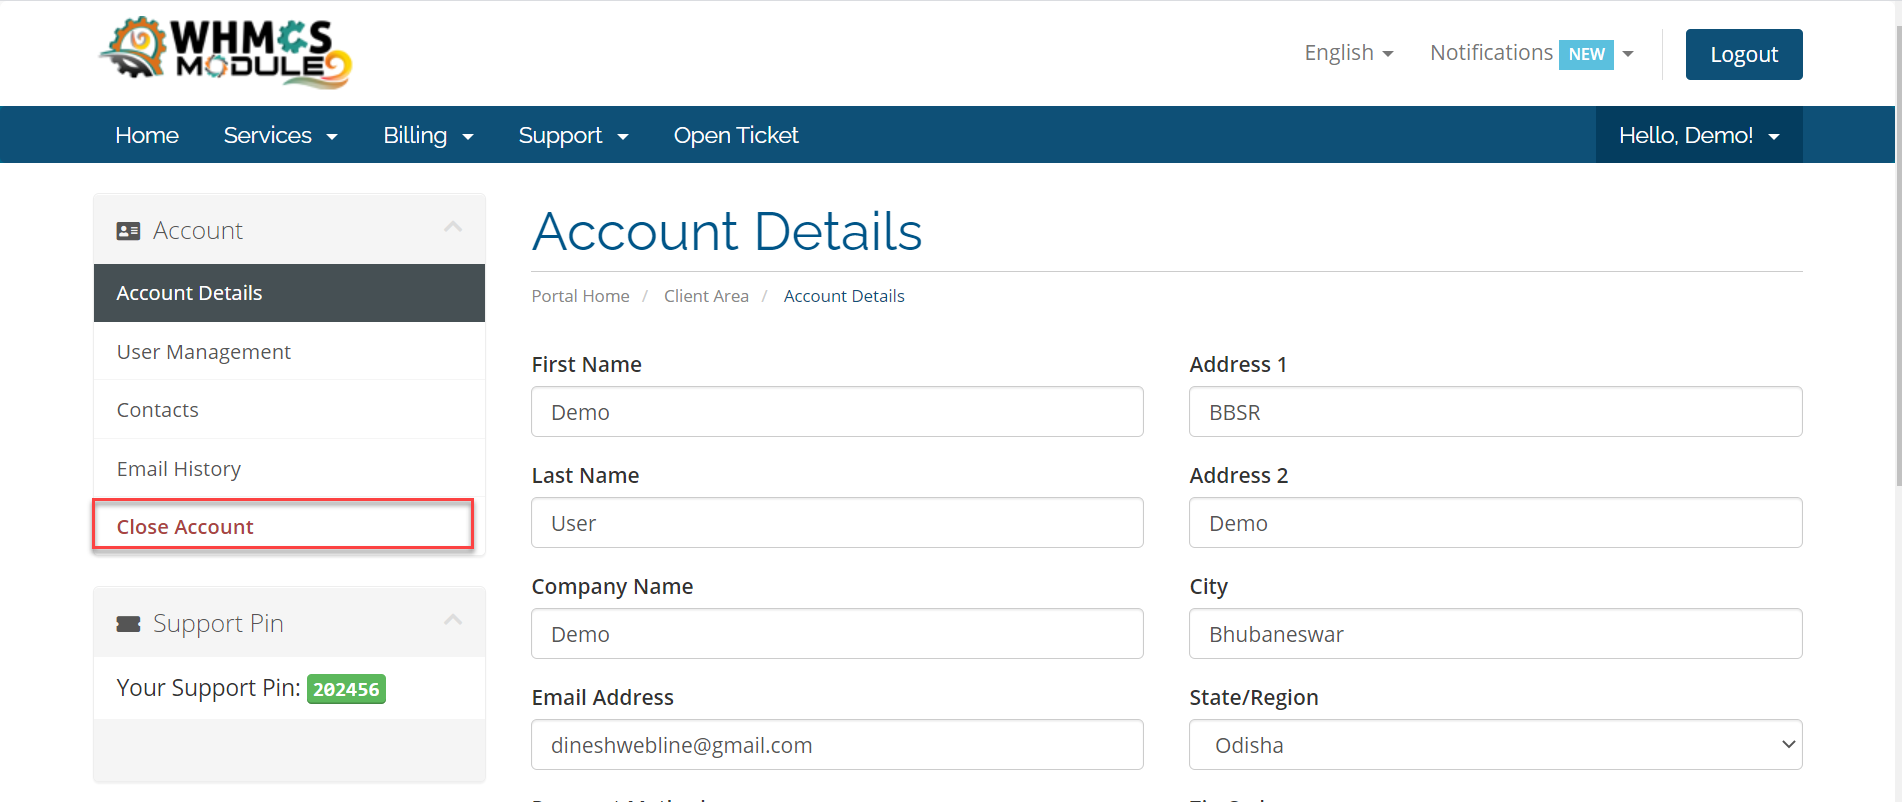 Account Status Extended Module for WHMCS